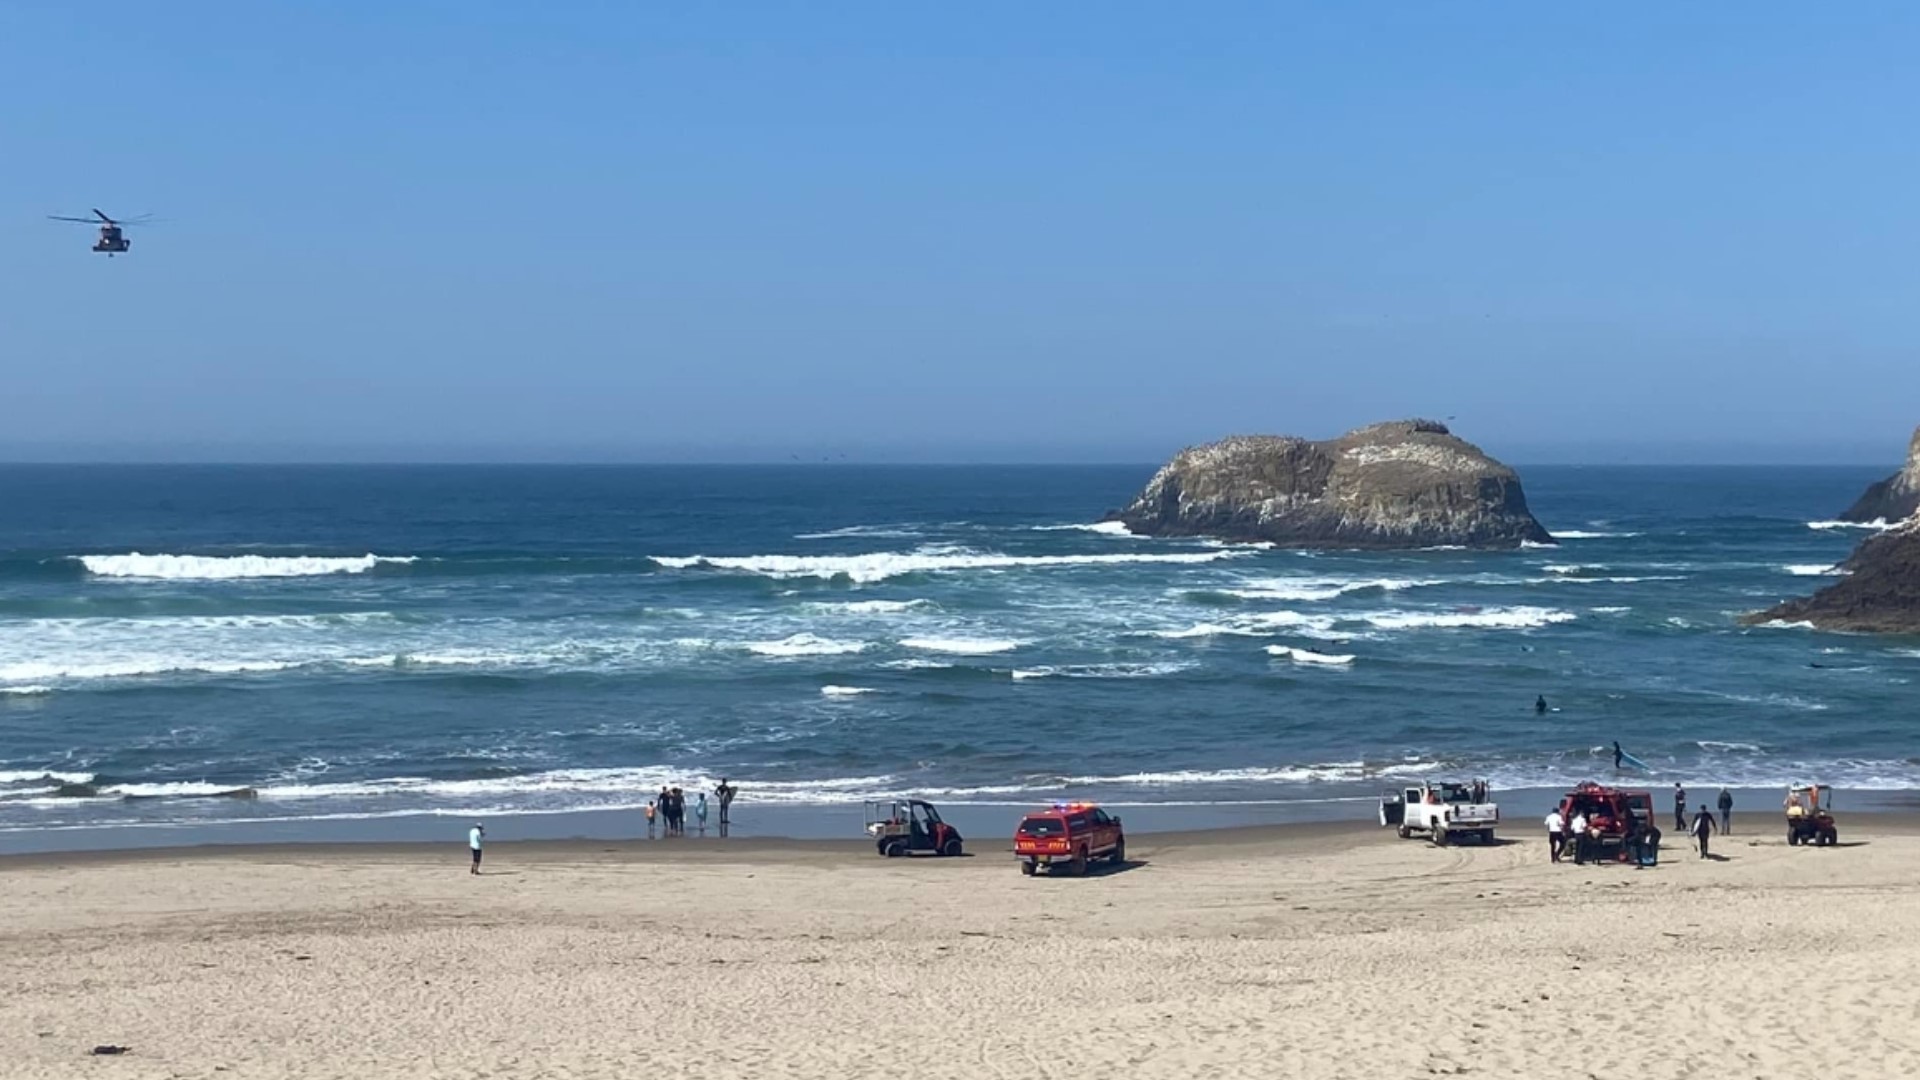 Lifeguards and first responders rescued two kids and four adults who were swept out by a rip current at Chapman Point on Saturday.